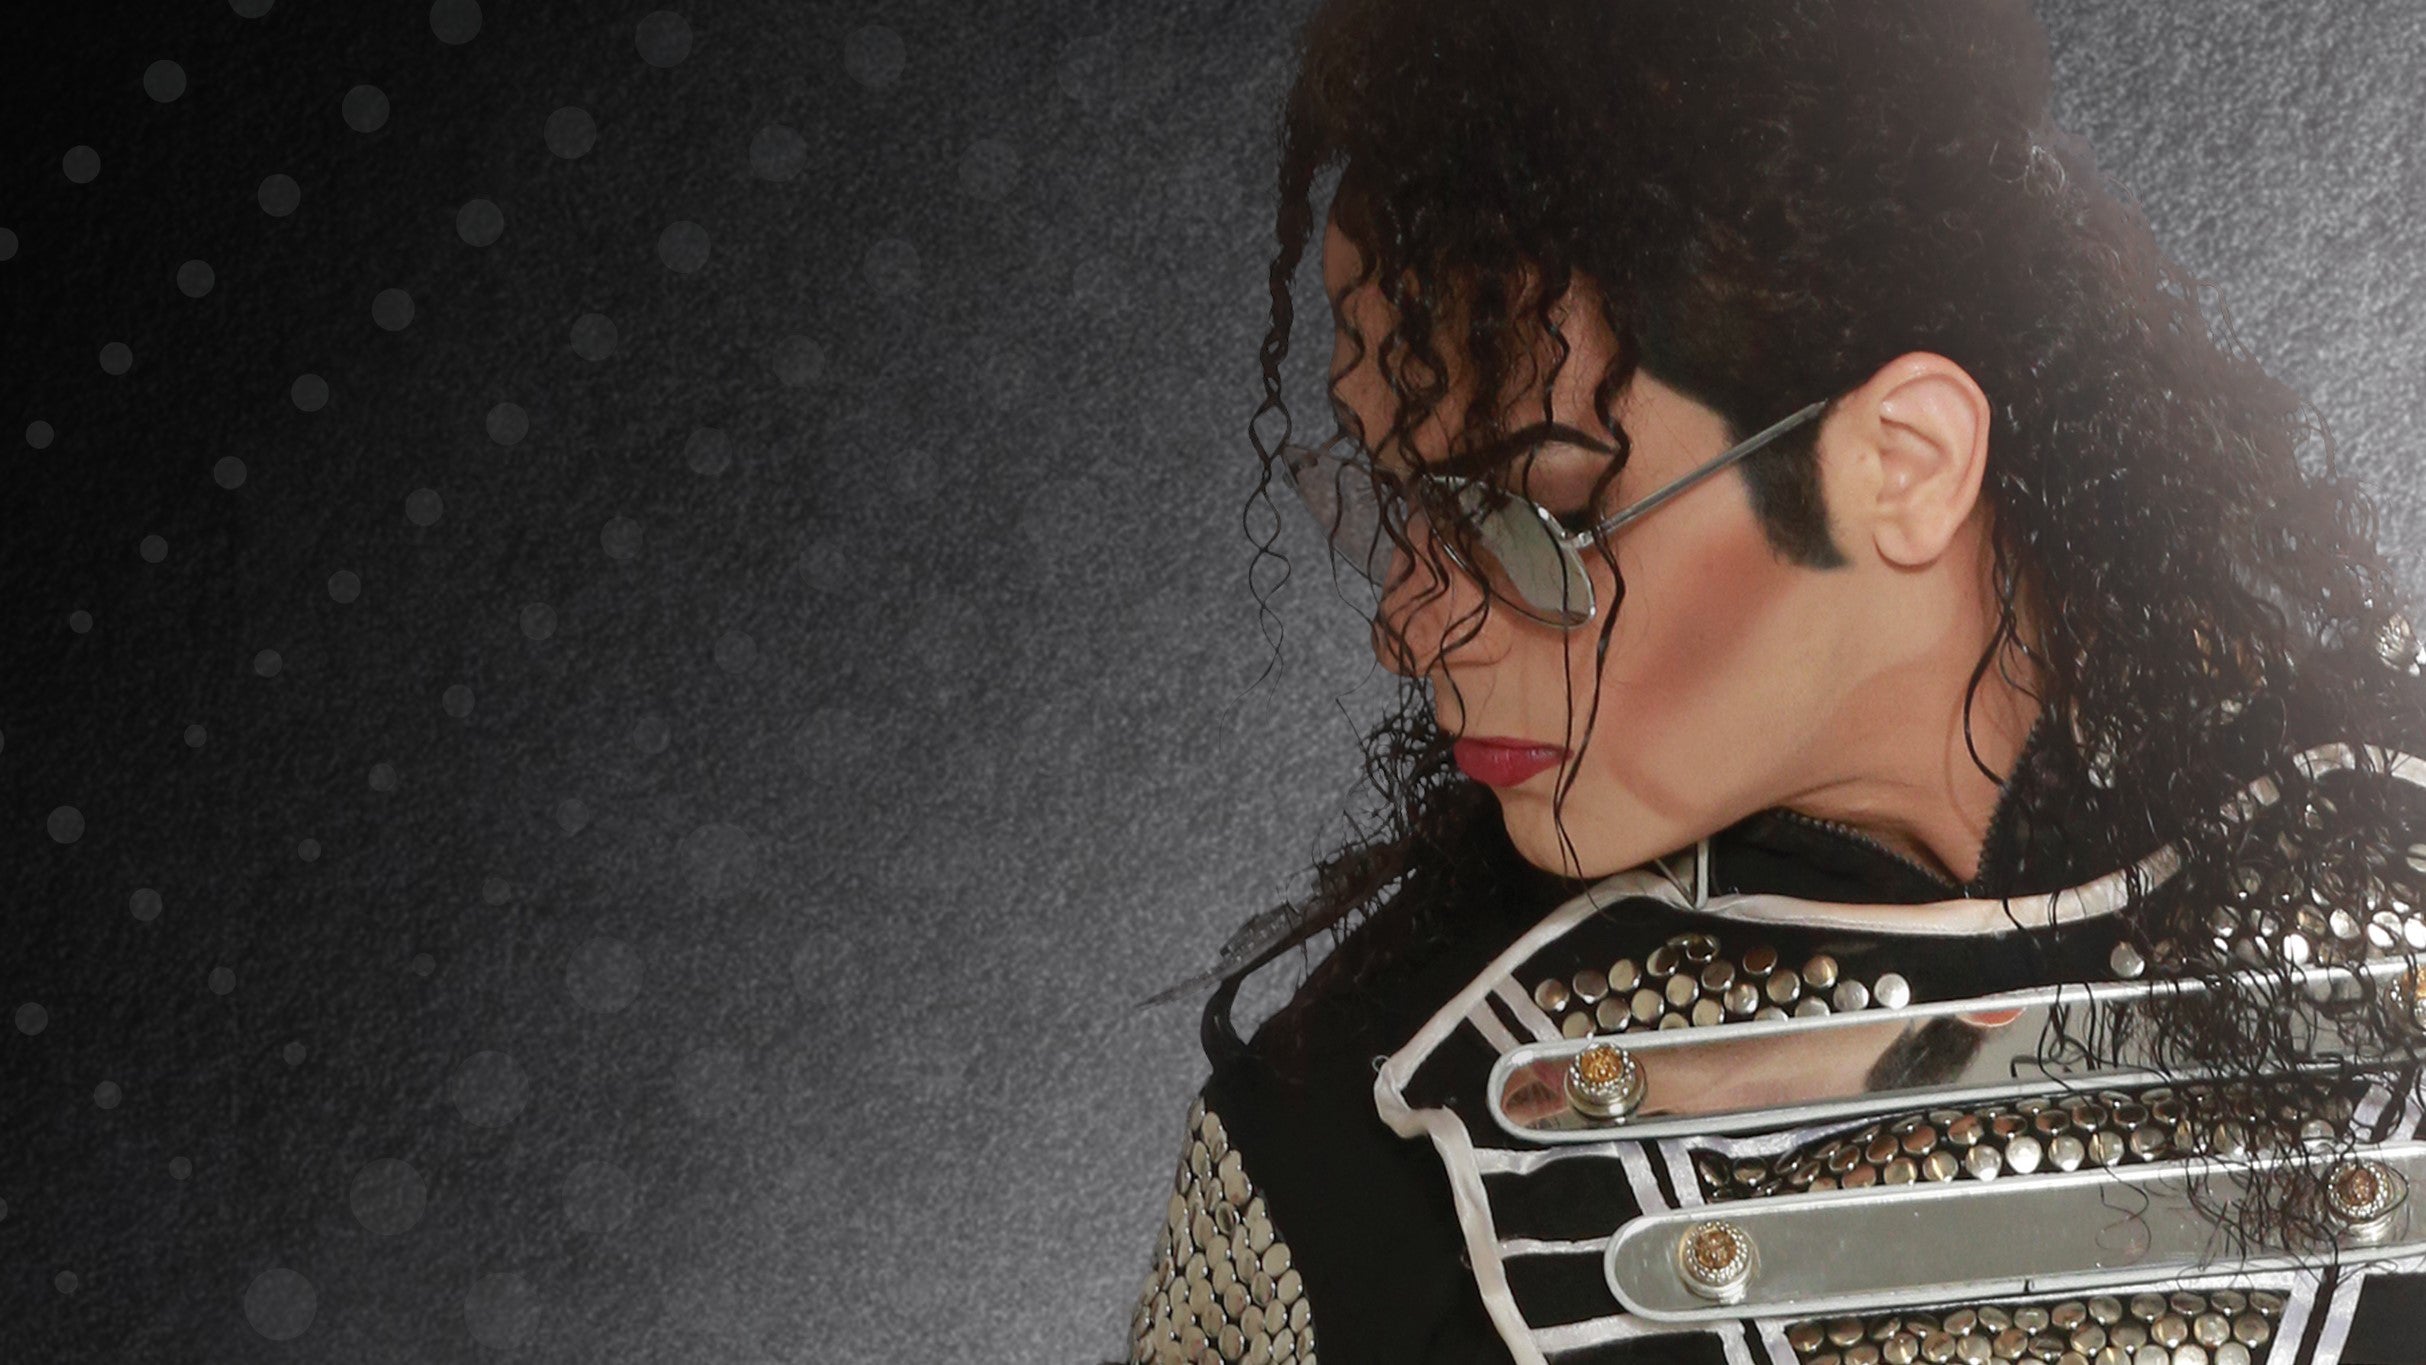 MJ LIVE - Michael Jackson Tribute presale password for performance tickets in Detroit, MI (Sound Board at MotorCity Casino Hotel)